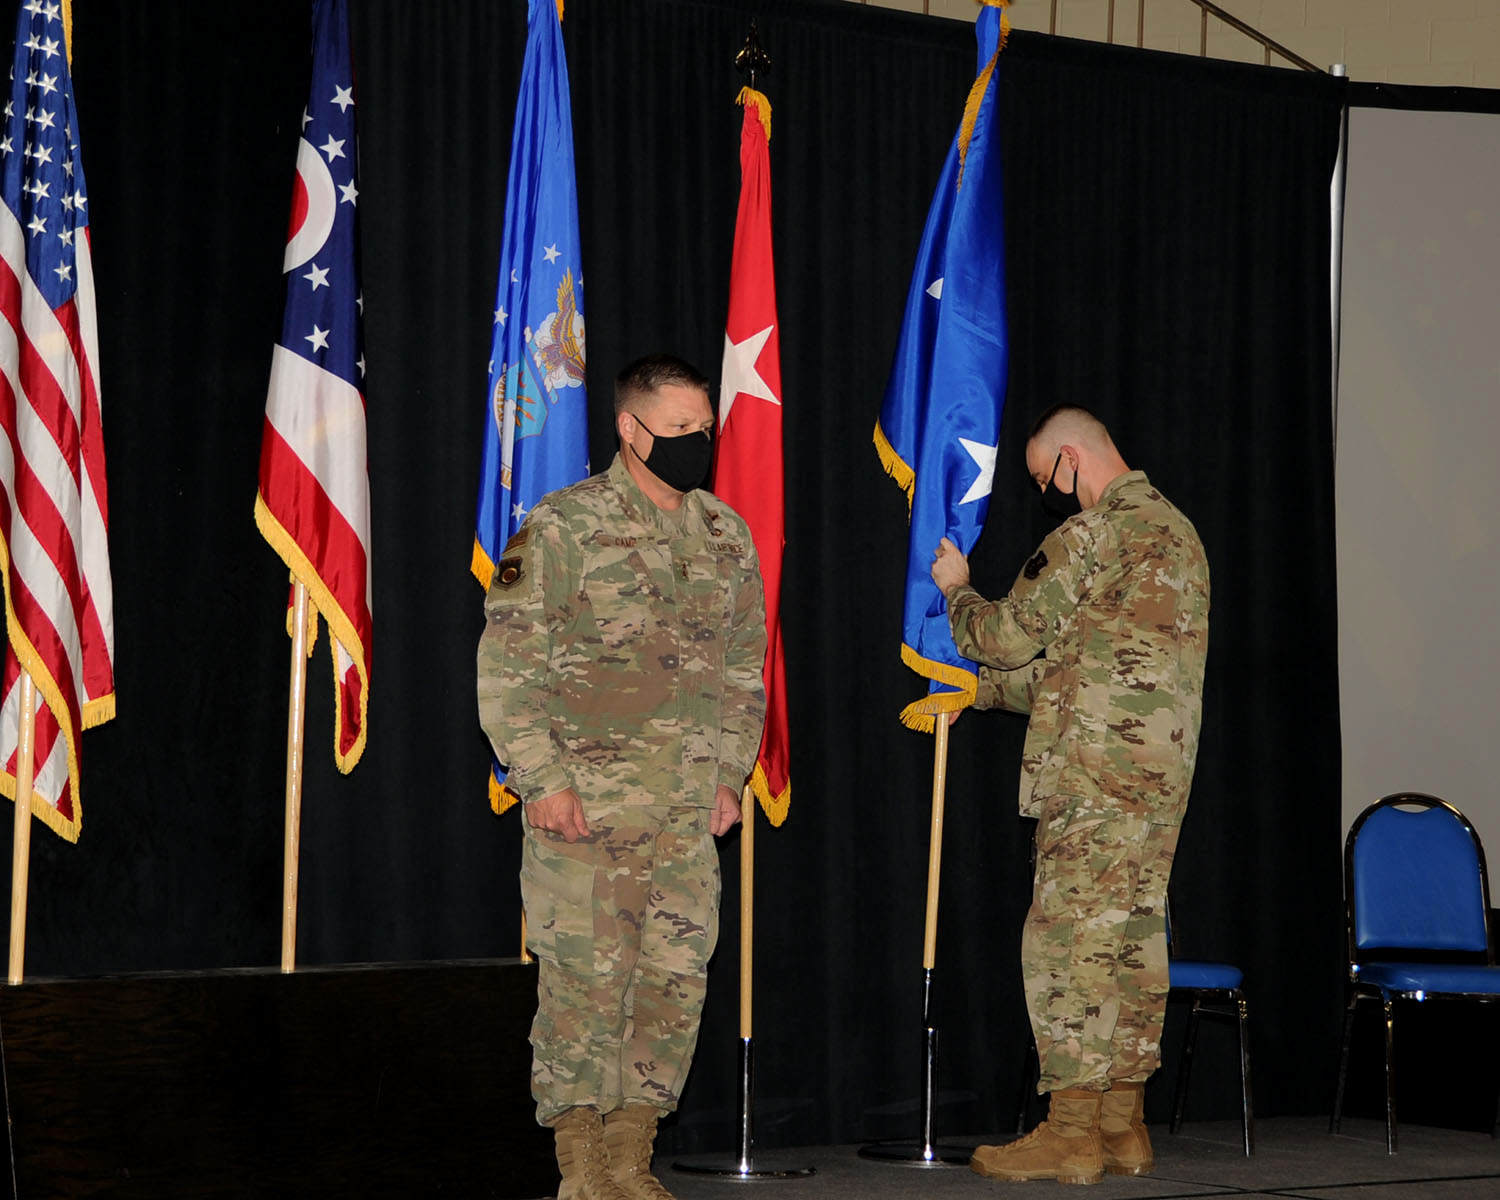 Maj. Gen. James R. Camp stands at attention while Master Sgt. Matthew Dill places the general’s two-star flag in its base.